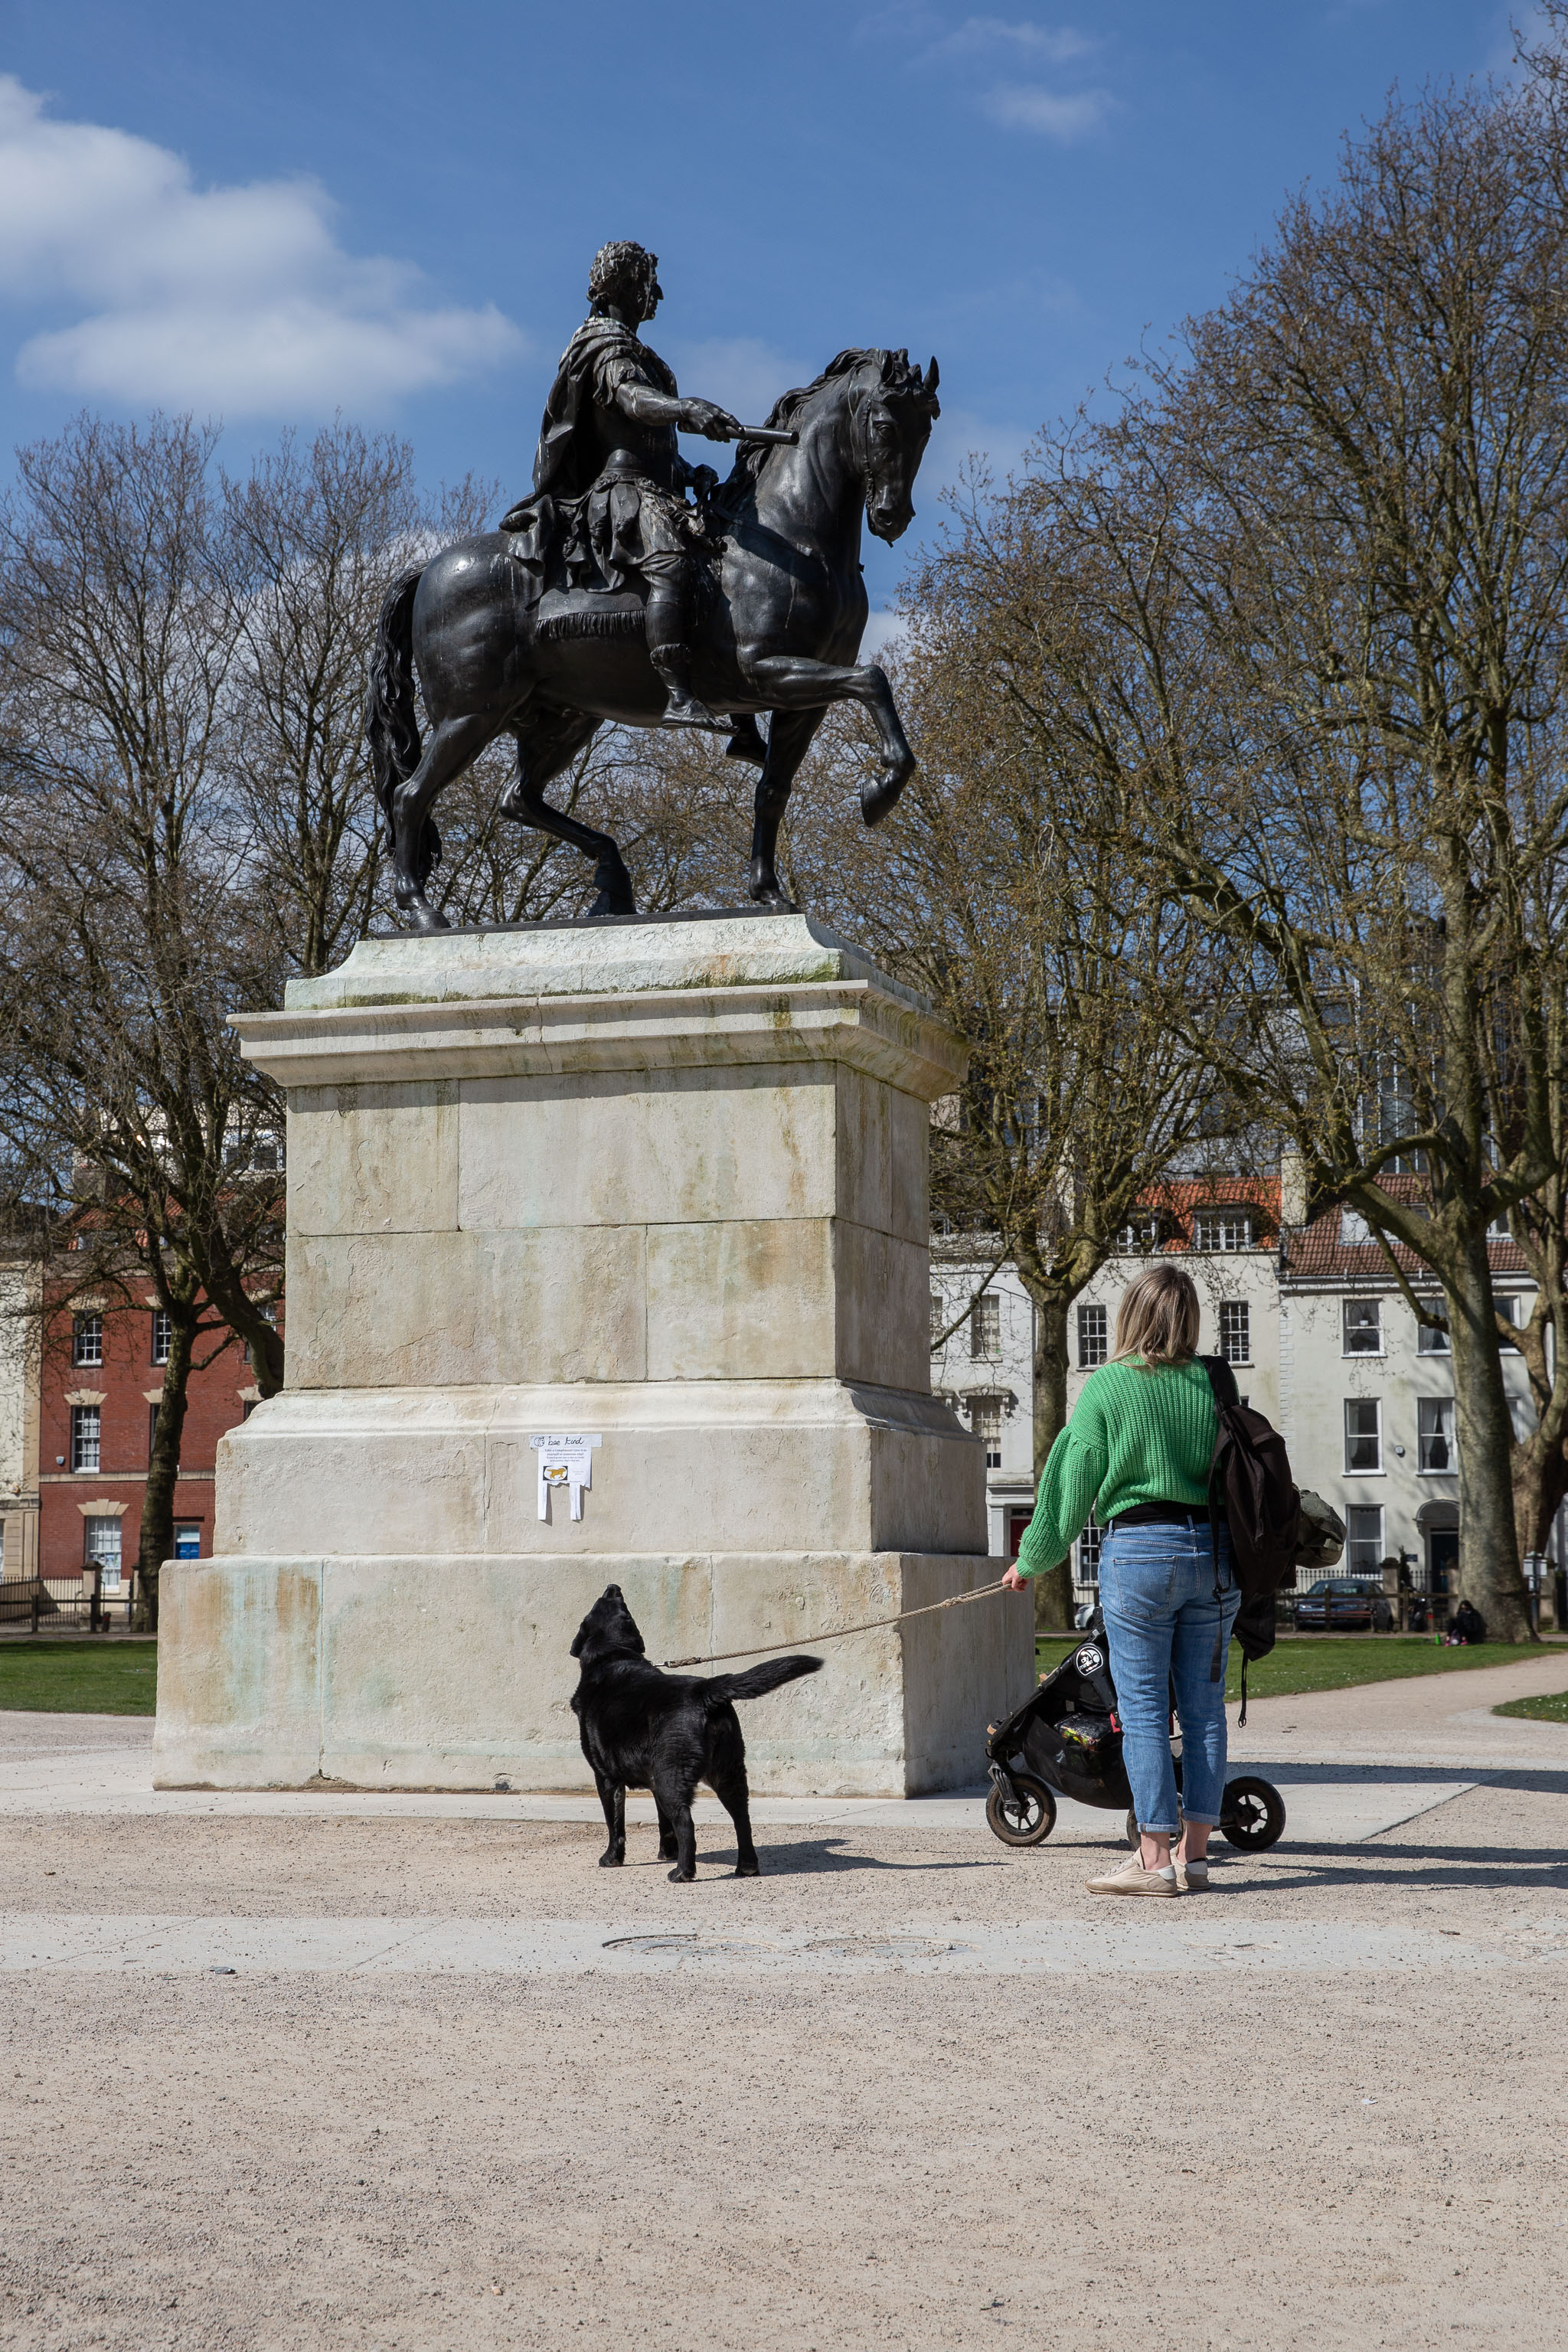 Dogged
The dog was very unhappy about the statue. To be fair, from the dog's perspective, William III is basically holding a stick above him while refusin...